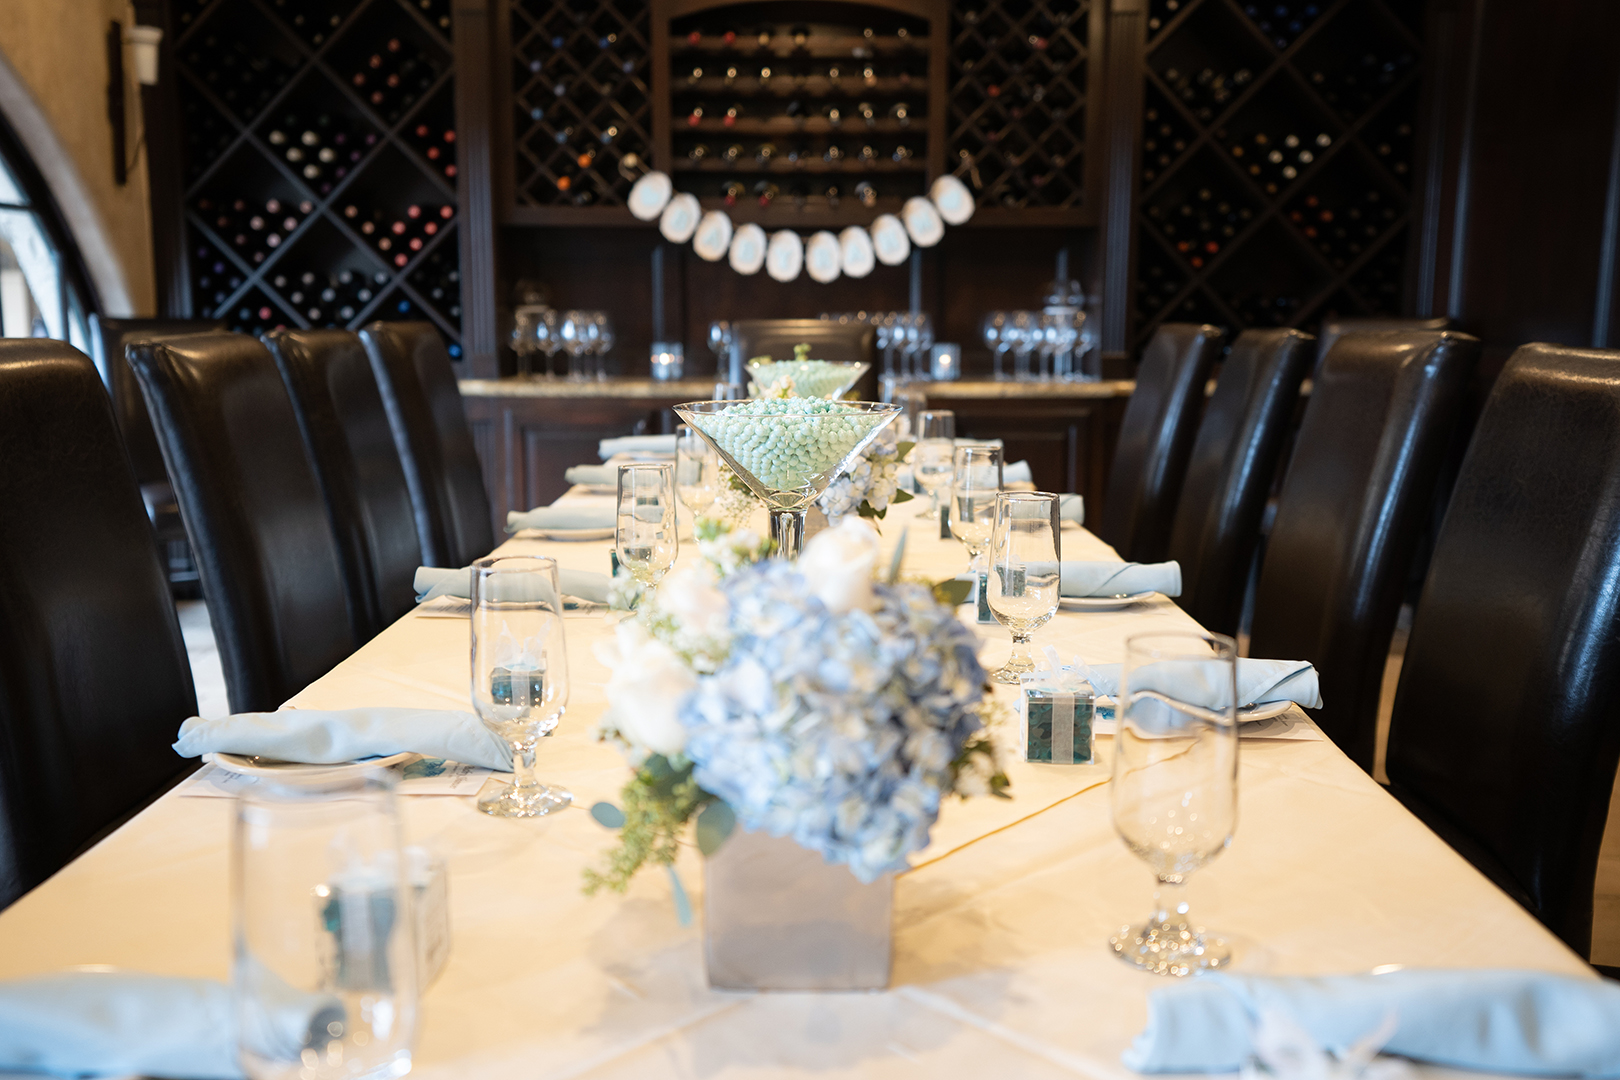 Boccaccio's private wine room with a banquet table with floral center pieces set up for a private event